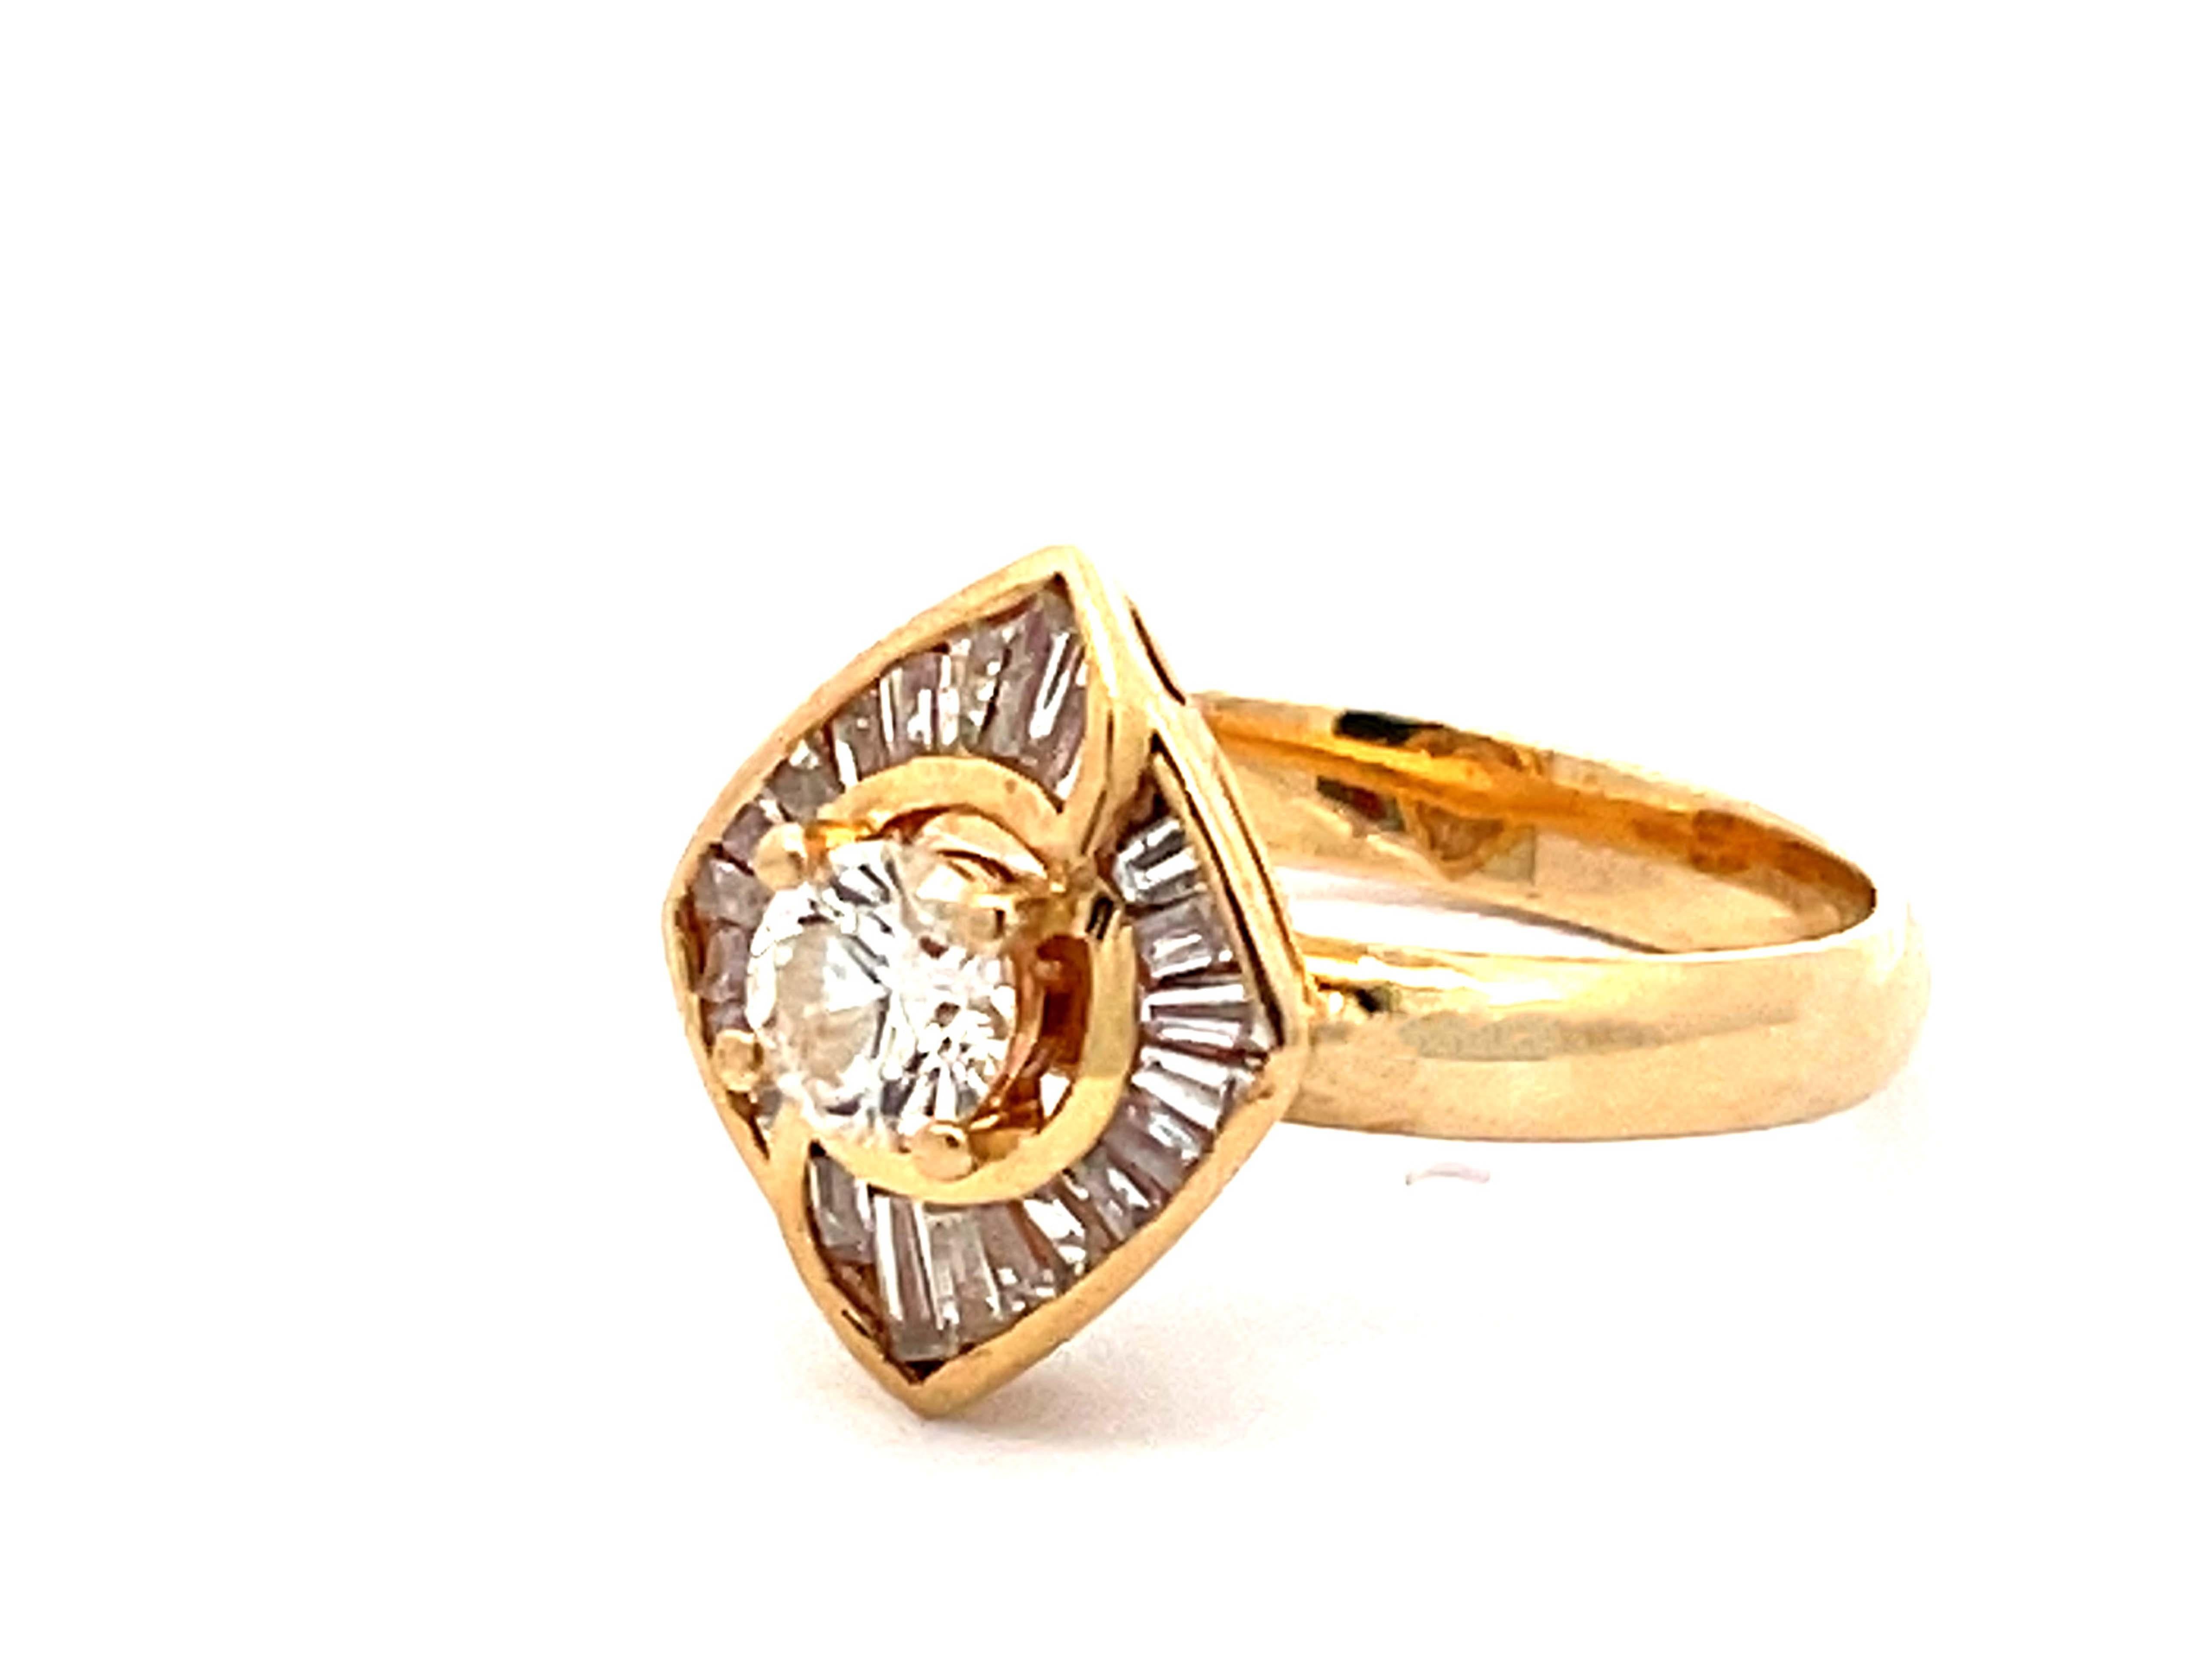 Round Brilliant Cut Diamond in Halo Engagement Ring in 18K Gold In Excellent Condition For Sale In Honolulu, HI